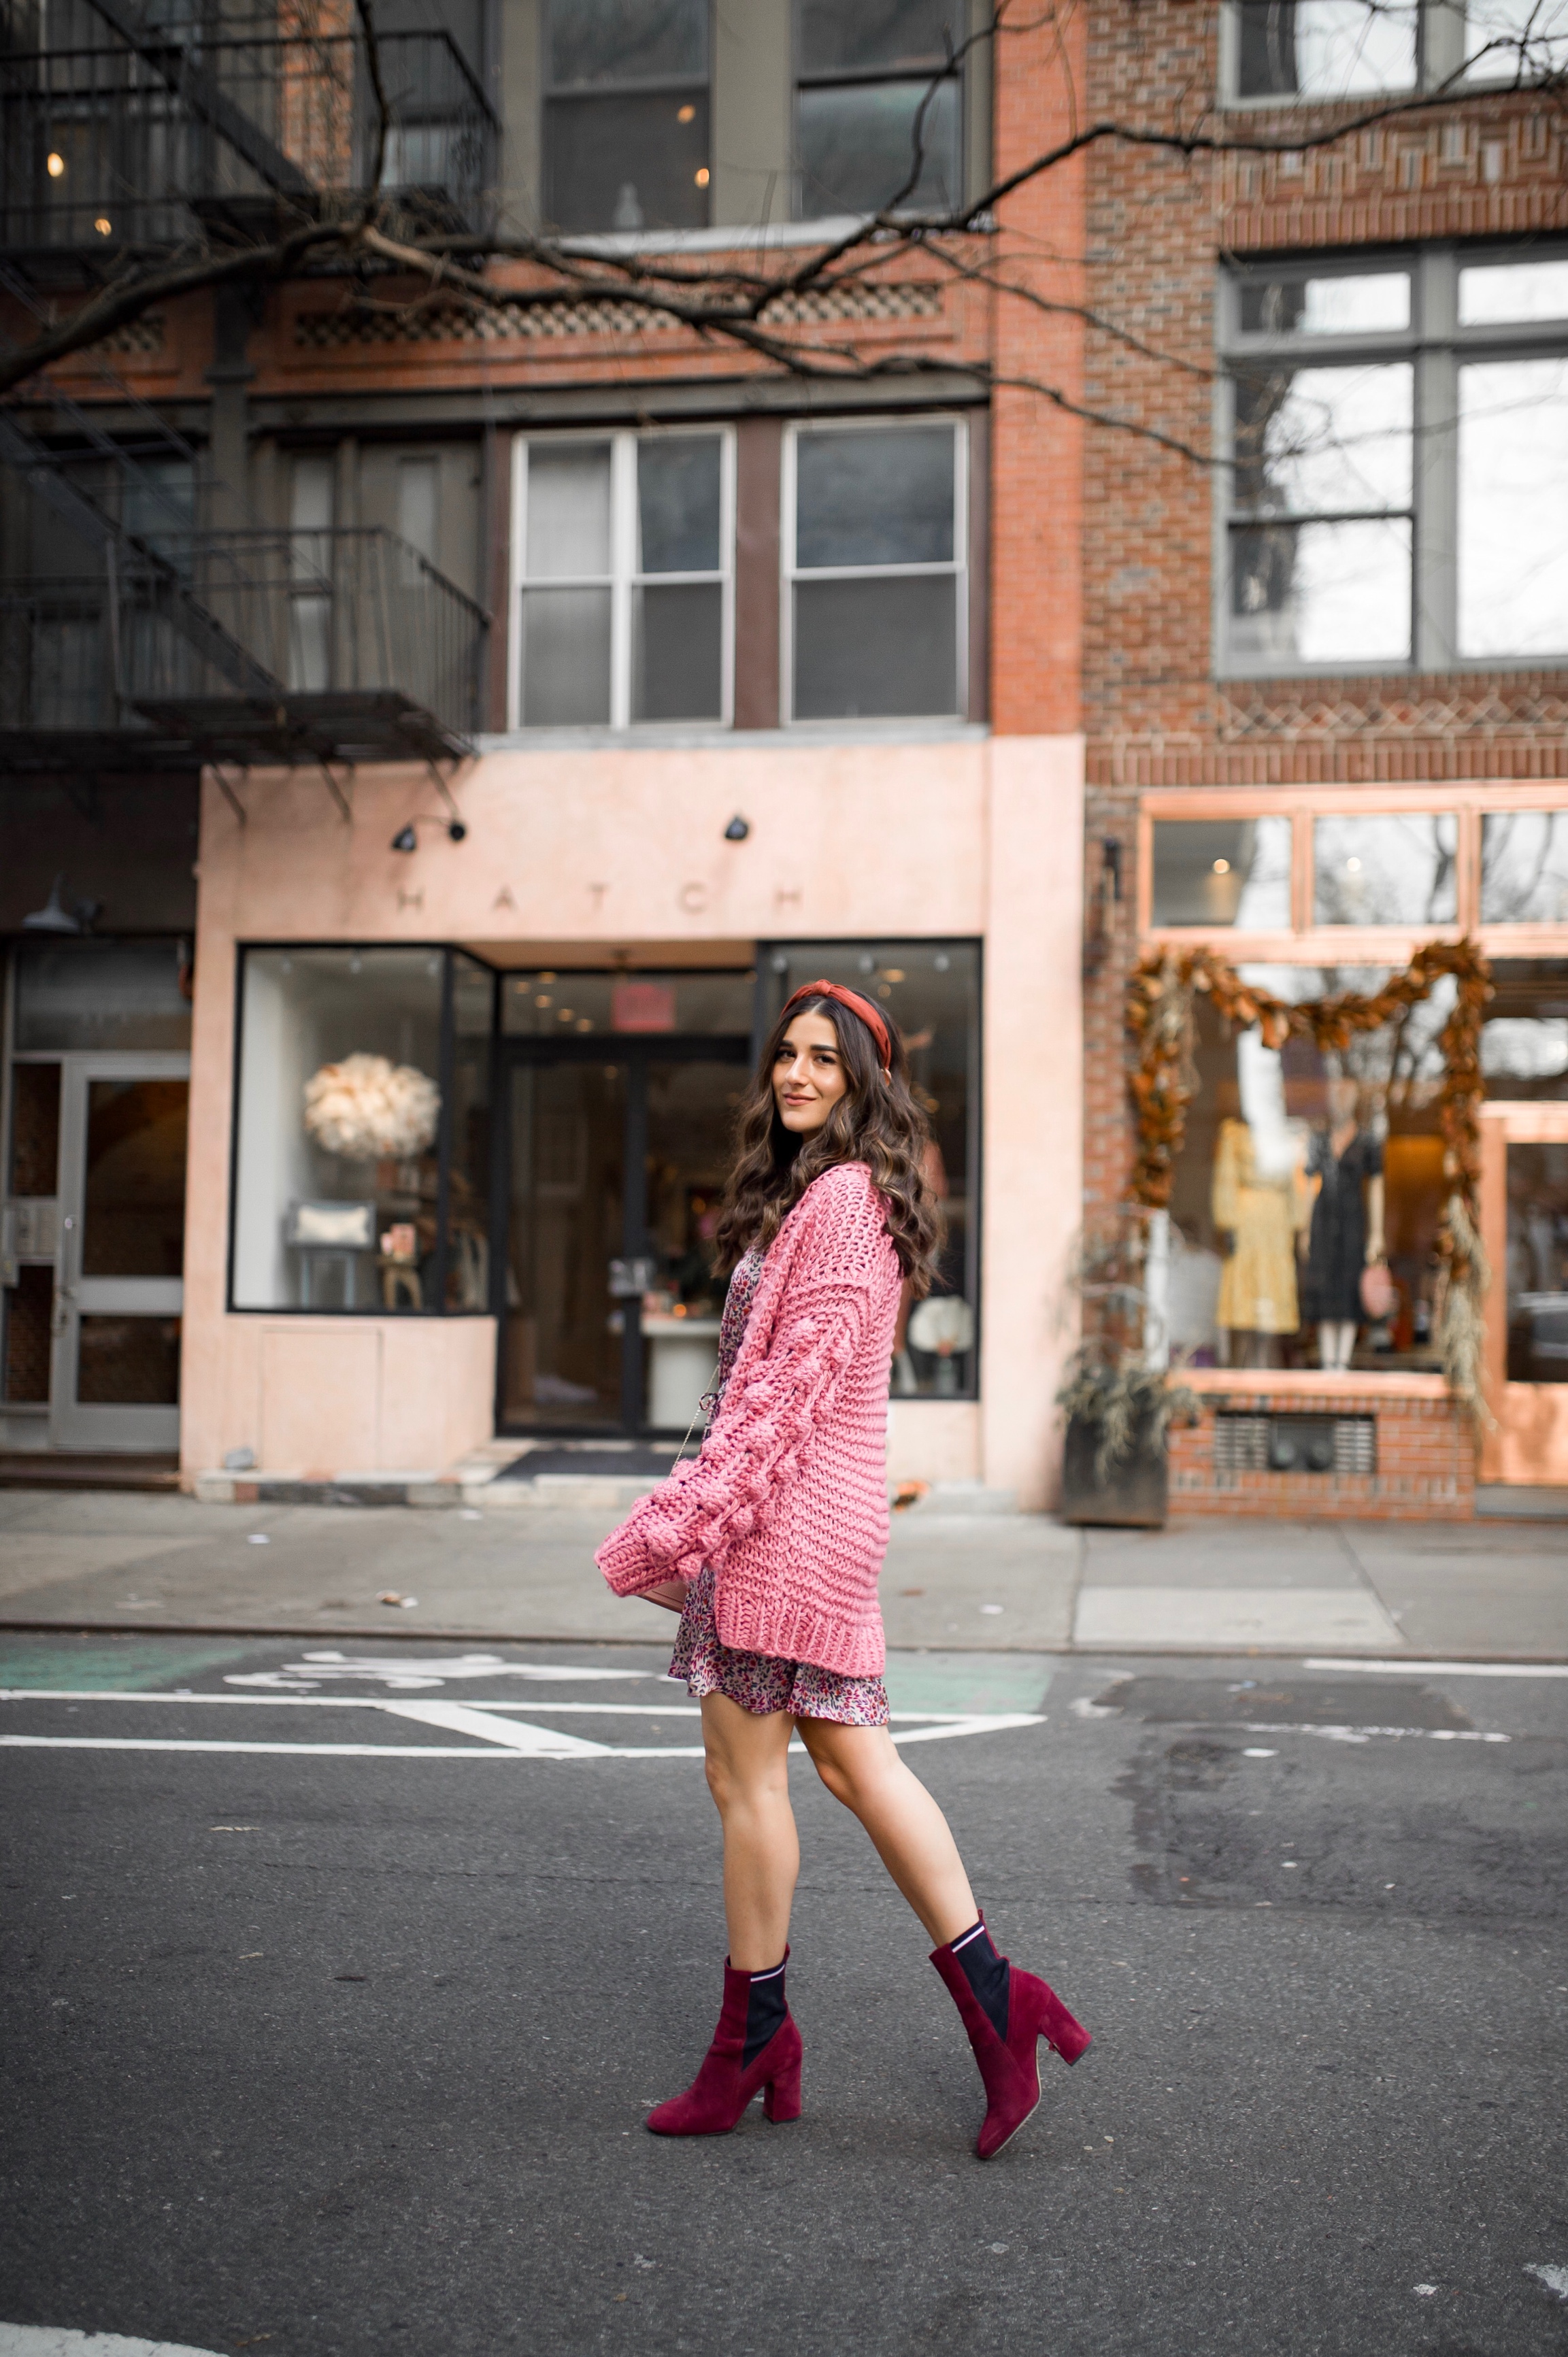 How Being In A Miserable Job Shaped My Entire Career Silk Floral Dress + Pink Pom Pom Sweater Esther Santer Fashion Blog NYC Street Style Blogger Outfit OOTD Trendy Shopping Mango Sale Winter How  To Wear Maroon Velvet Booties Zac Posen Swarovski Bag.jpg